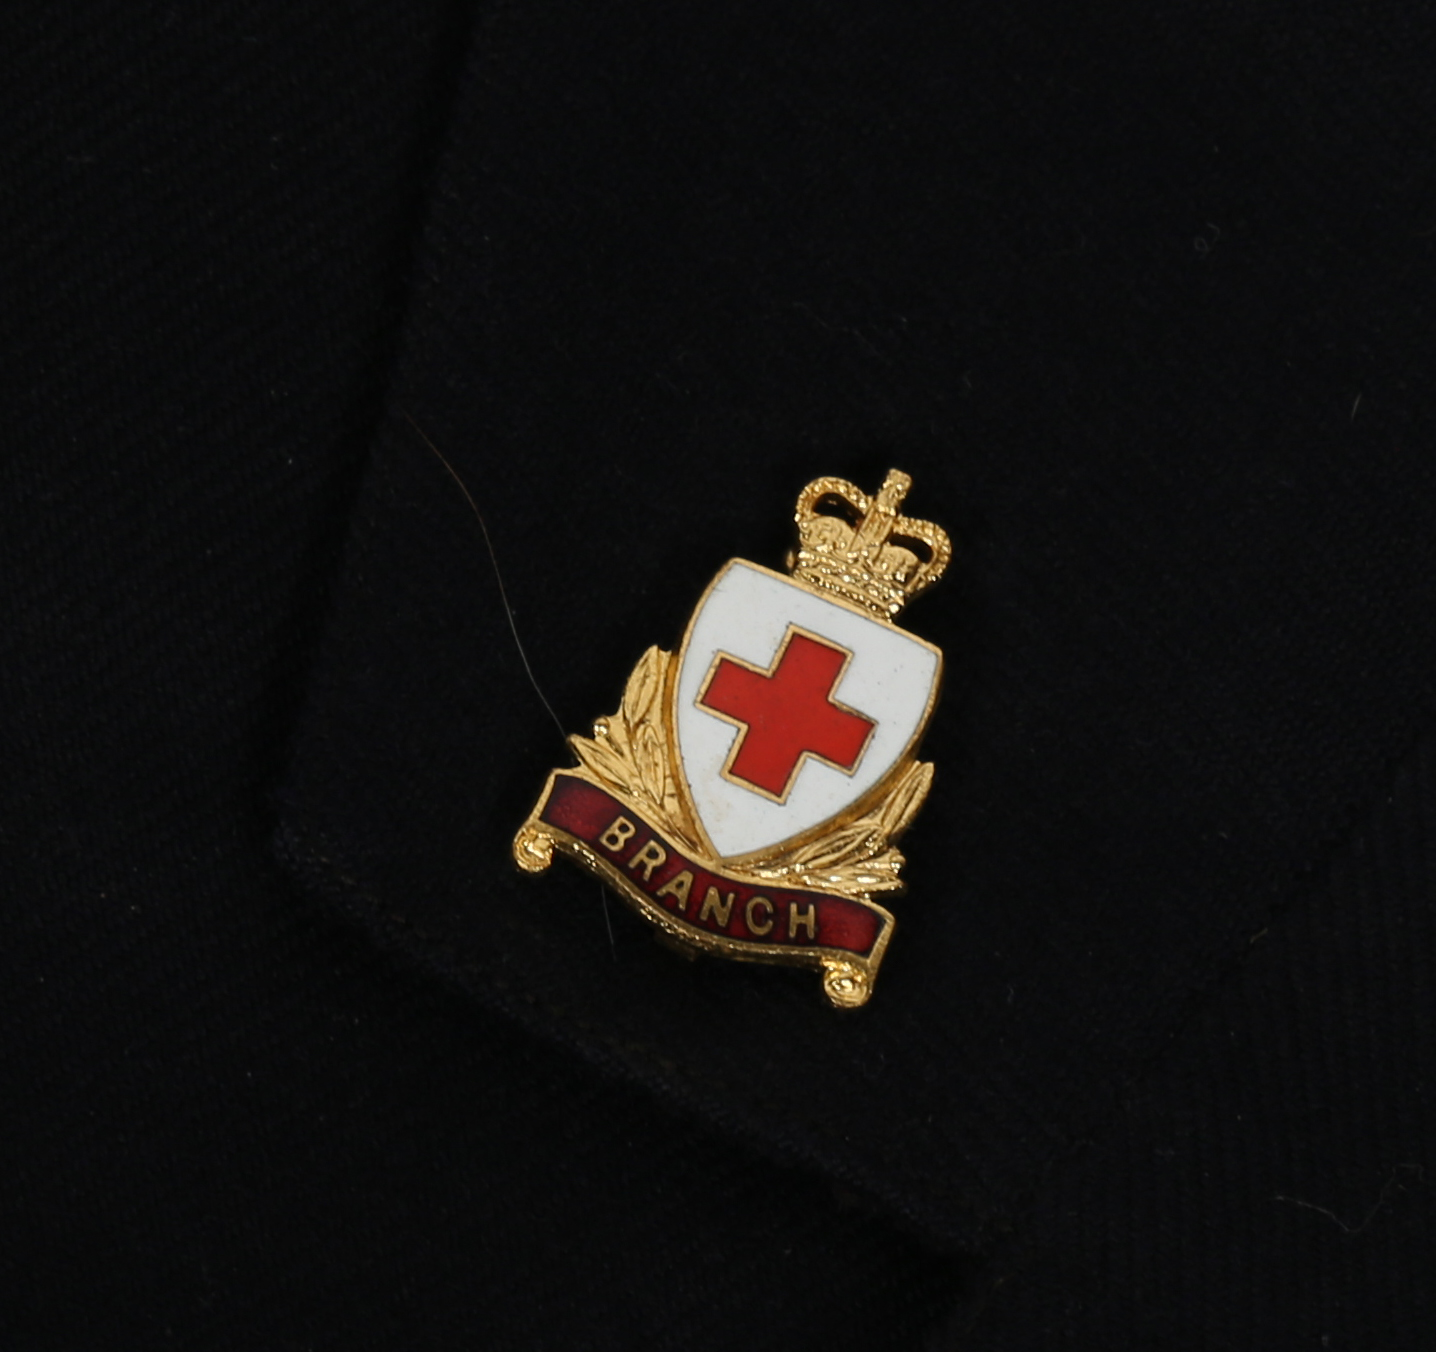 Grouping of British Red Cross uniforms, Jacket and Trousers, British Red Cross buttons - Image 6 of 10